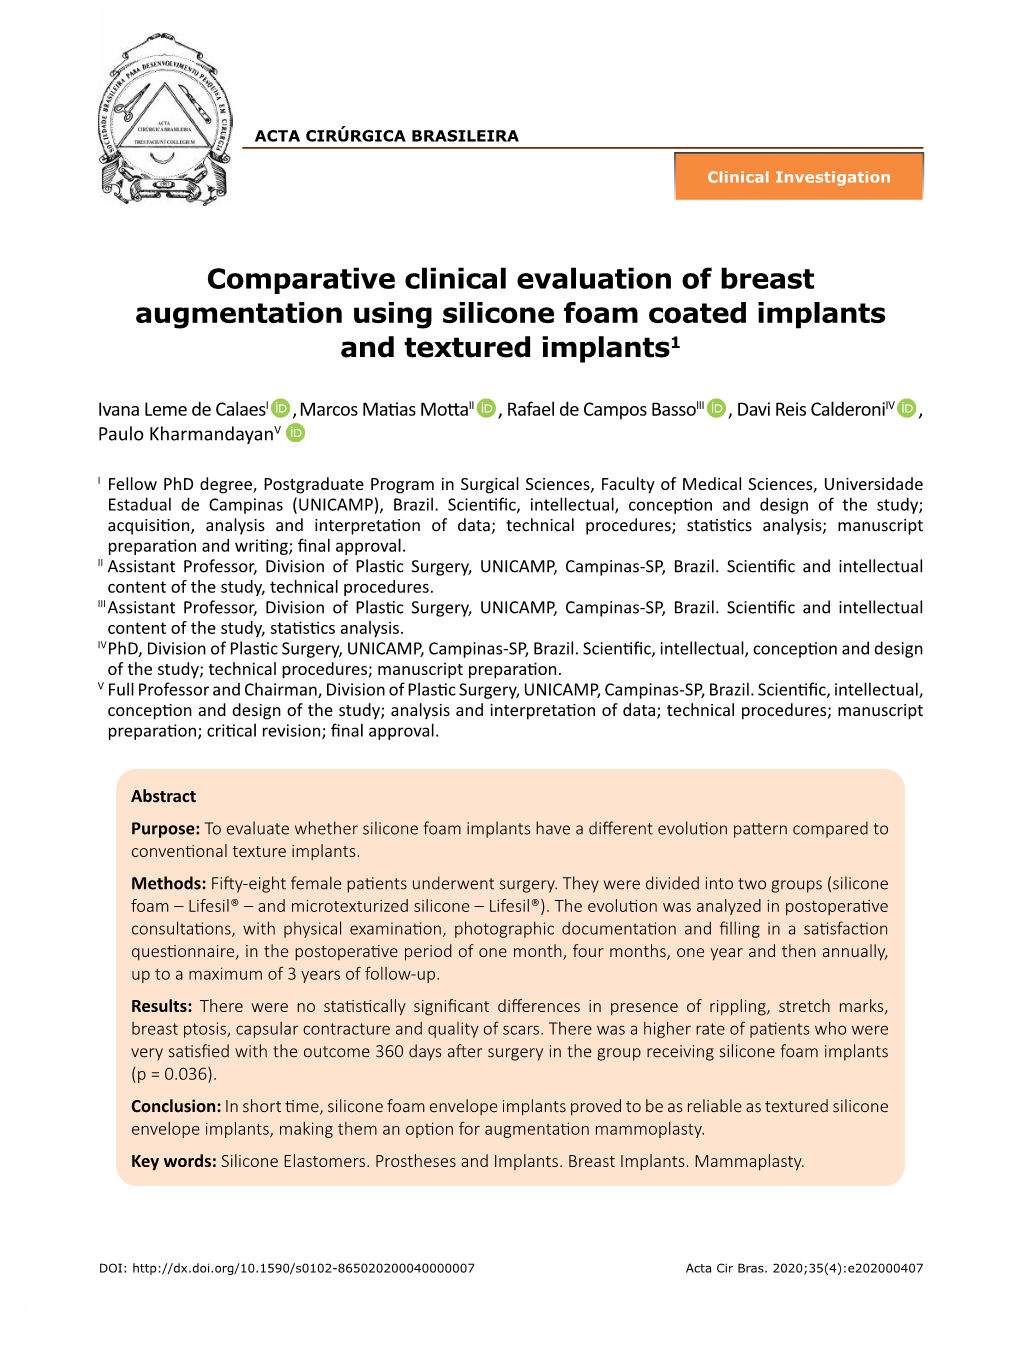 Comparative Clinical Evaluation of Breast Augmentation Using Silicone Foam Coated Implants and Textured Implants1